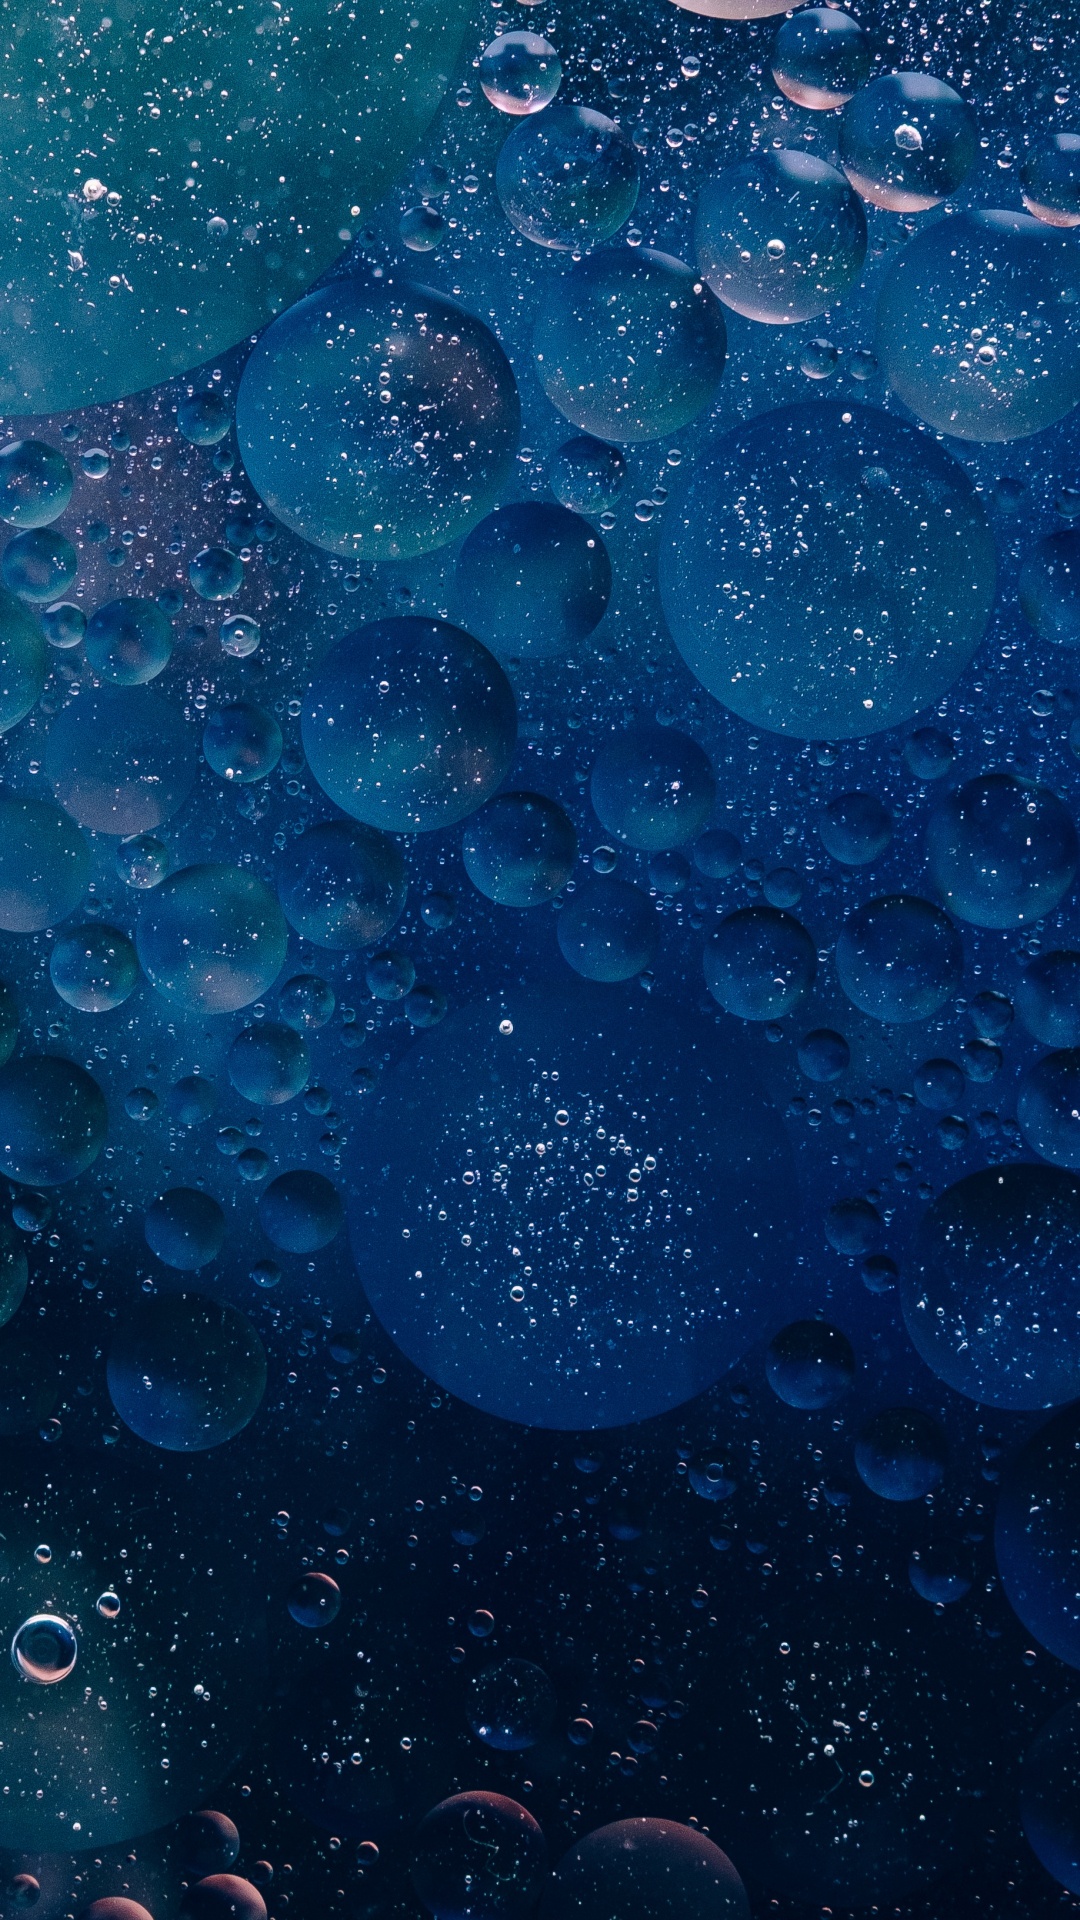 Water Droplets on Glass Panel. Wallpaper in 1080x1920 Resolution